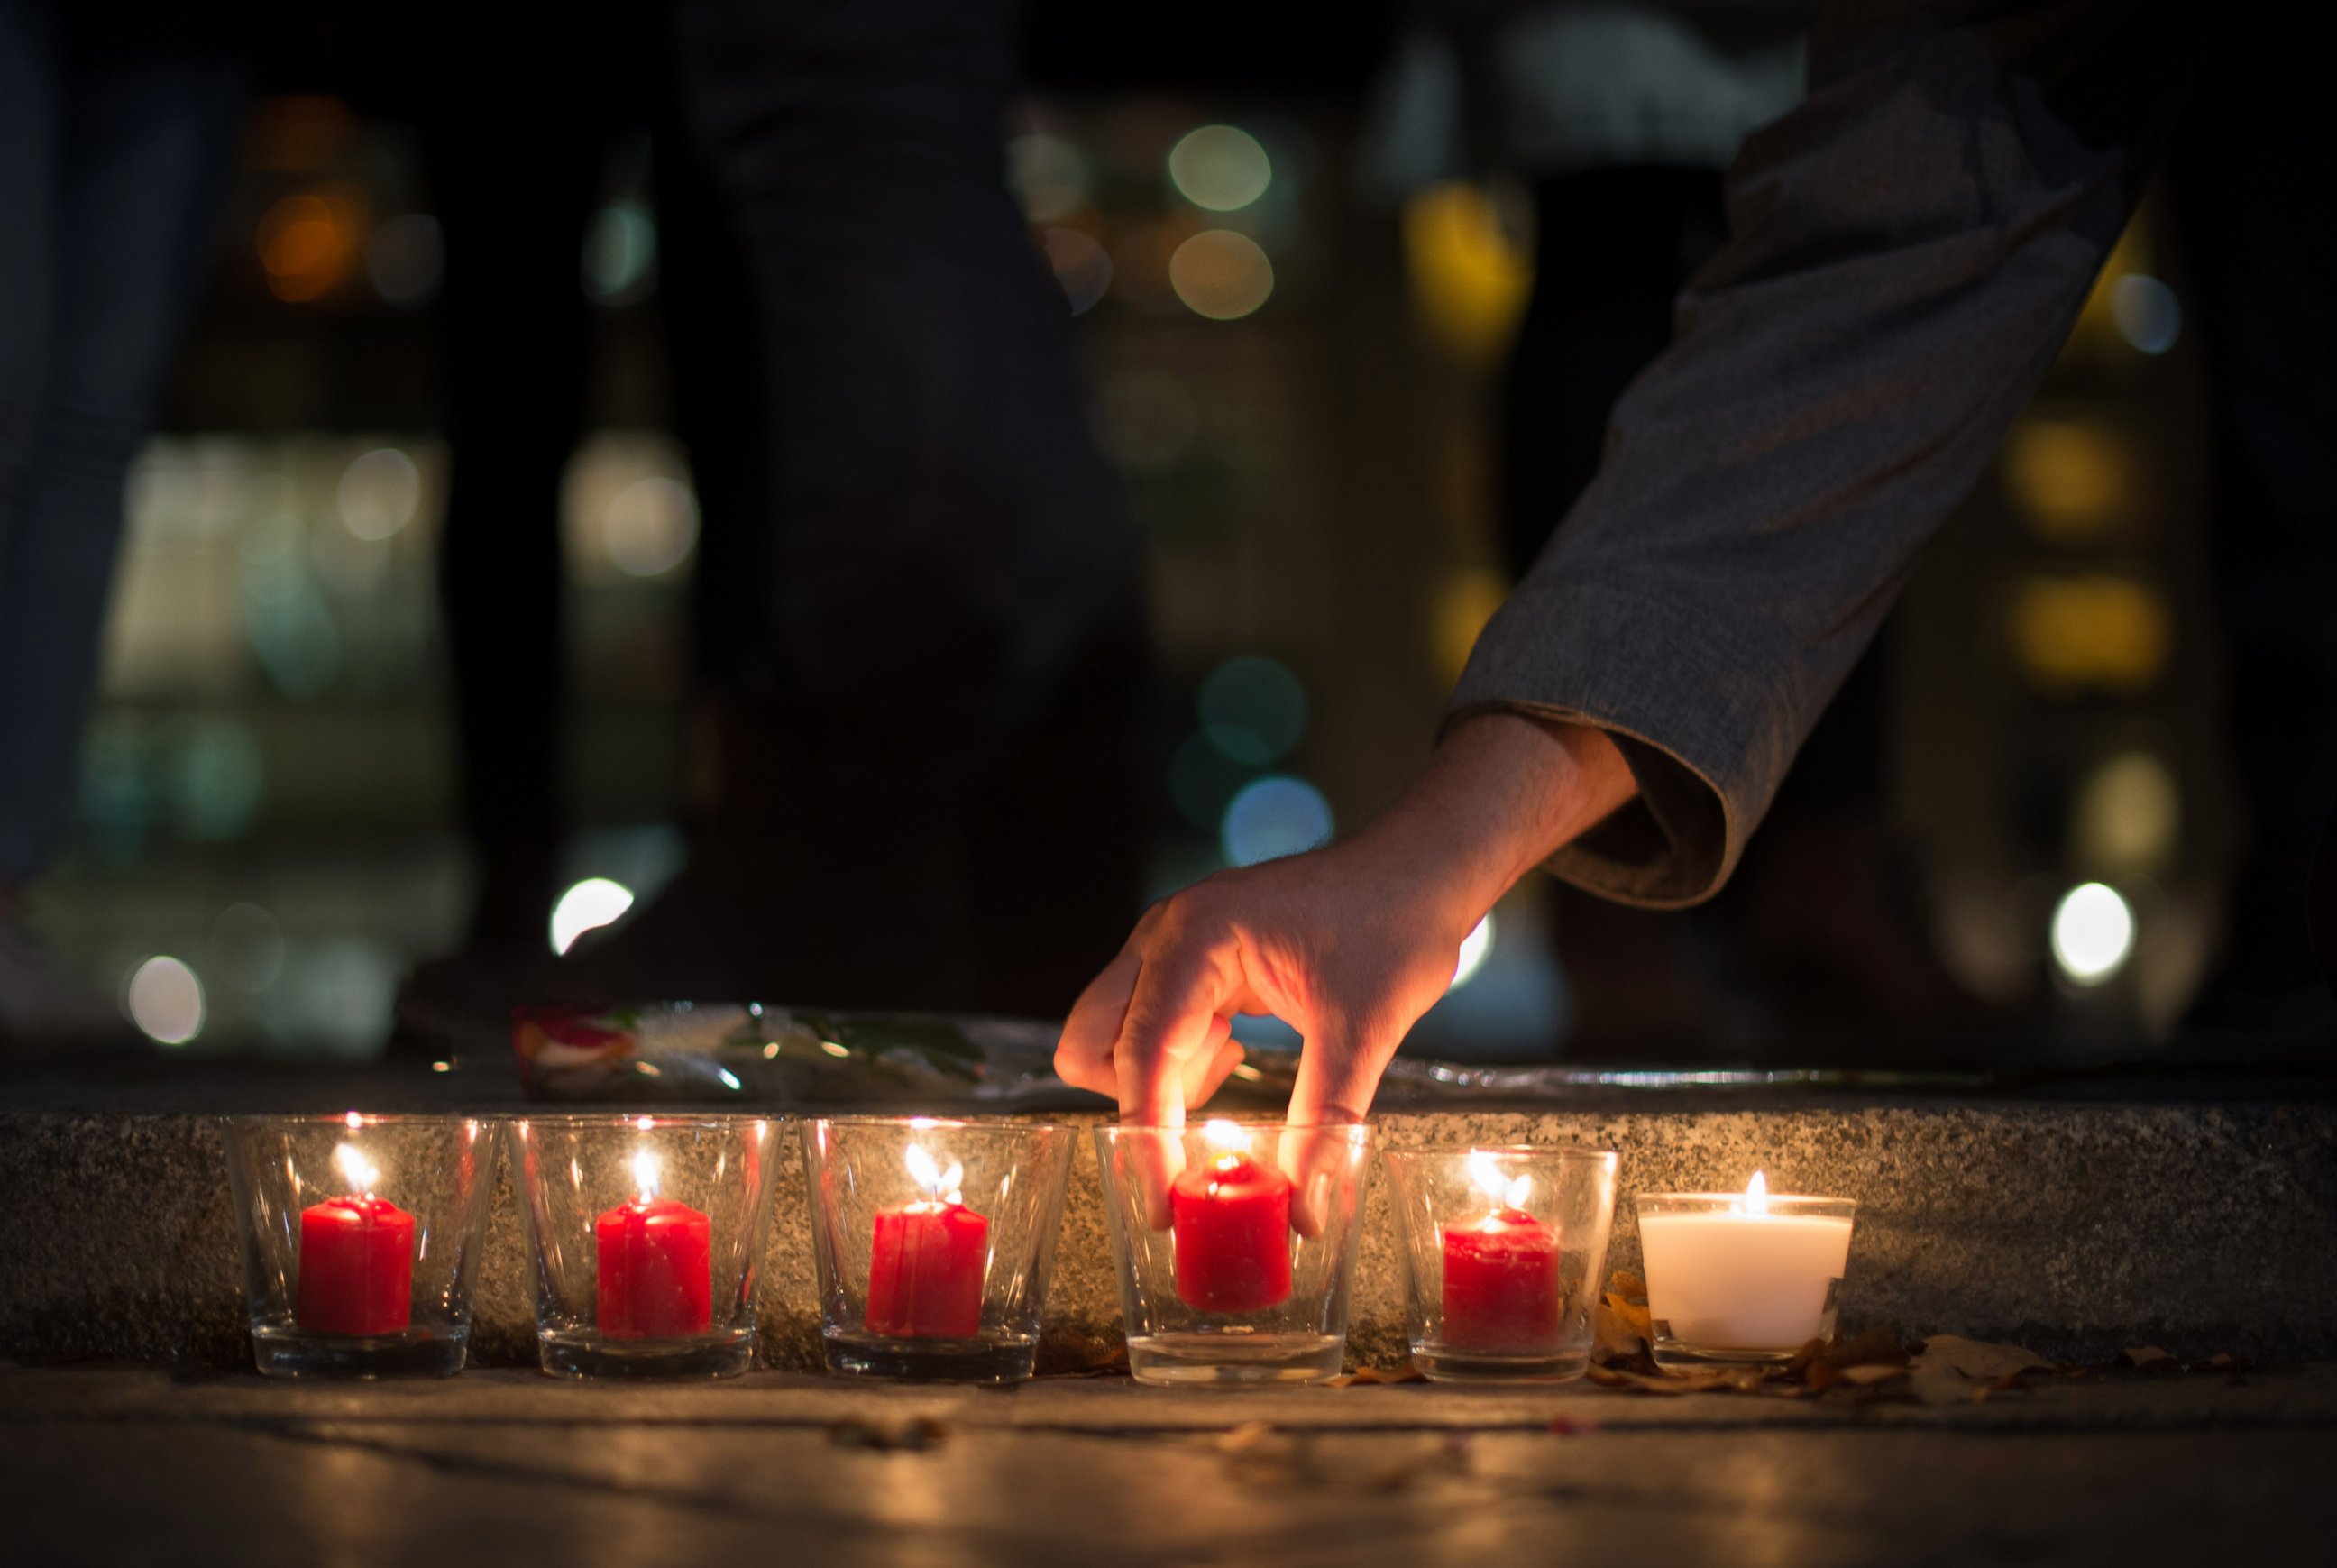 PHOTO: People light candles in tribute to the victims of the Paris attacks, outside the French embassy in Berlin on Nov. 13, 2015.